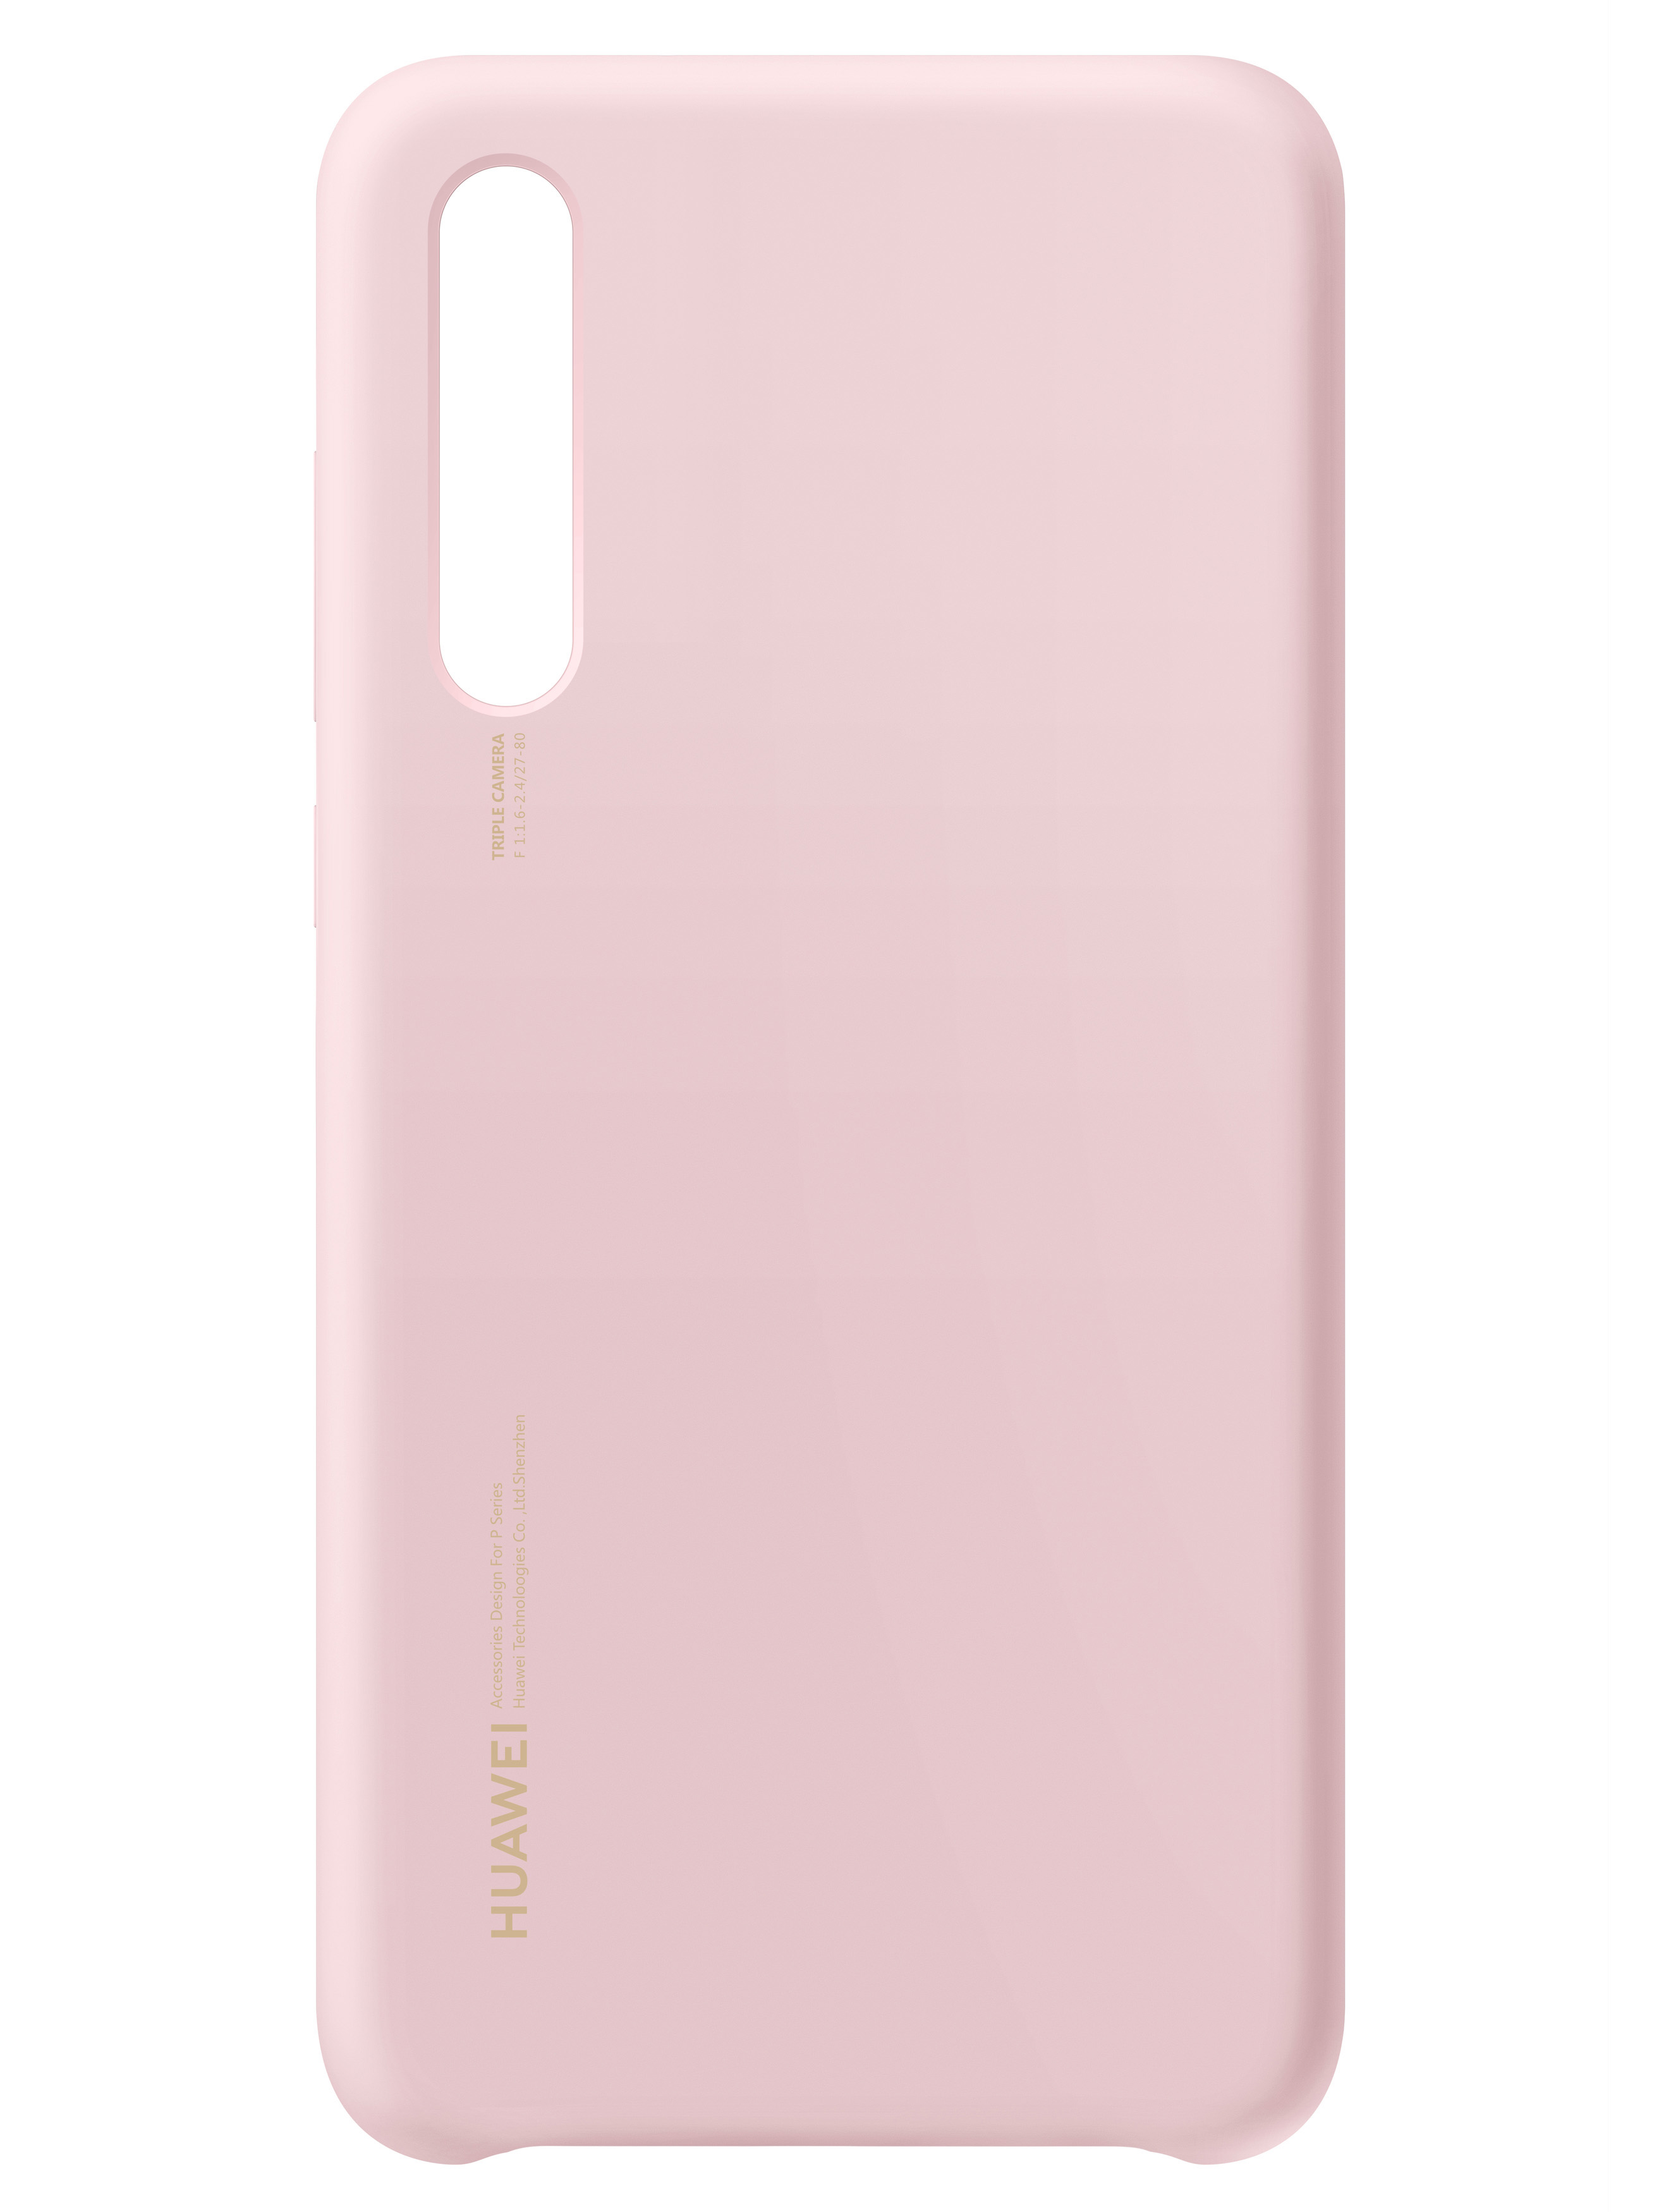 HUAWEI Silicon Case, Huawei, Pink Backcover, Pro, P20